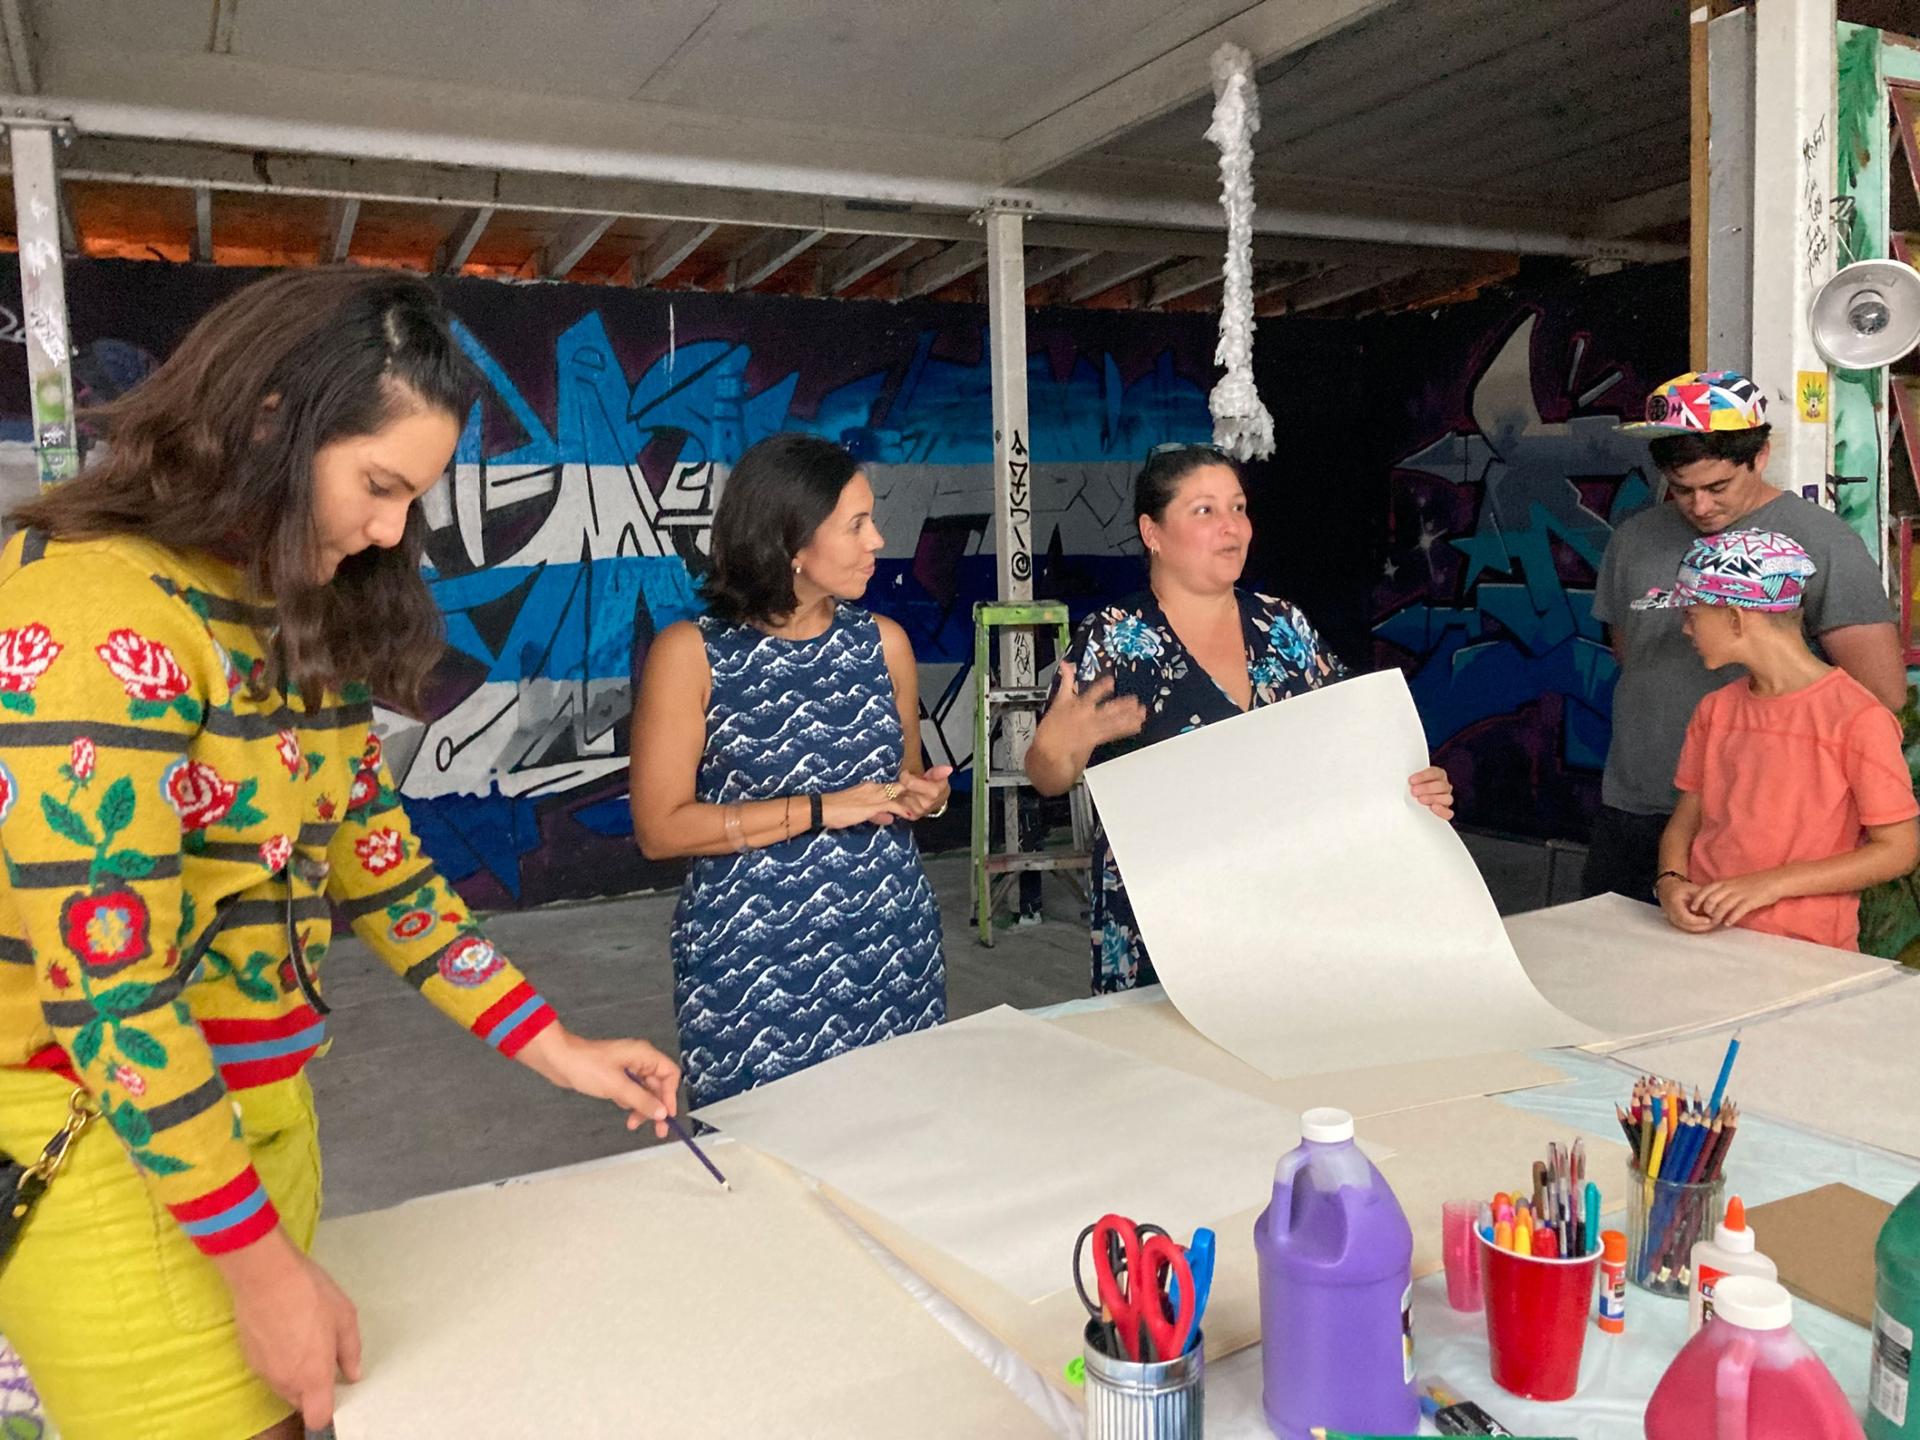 Ana Sofia Pelaez (in blue), founder of the Miami Freedom Project and Iris Ruiz (in black), Cuban artist and coordinator for the San Isidro movement lead an art workshop at La Esquina de Abuela, a cultural center in Miami.